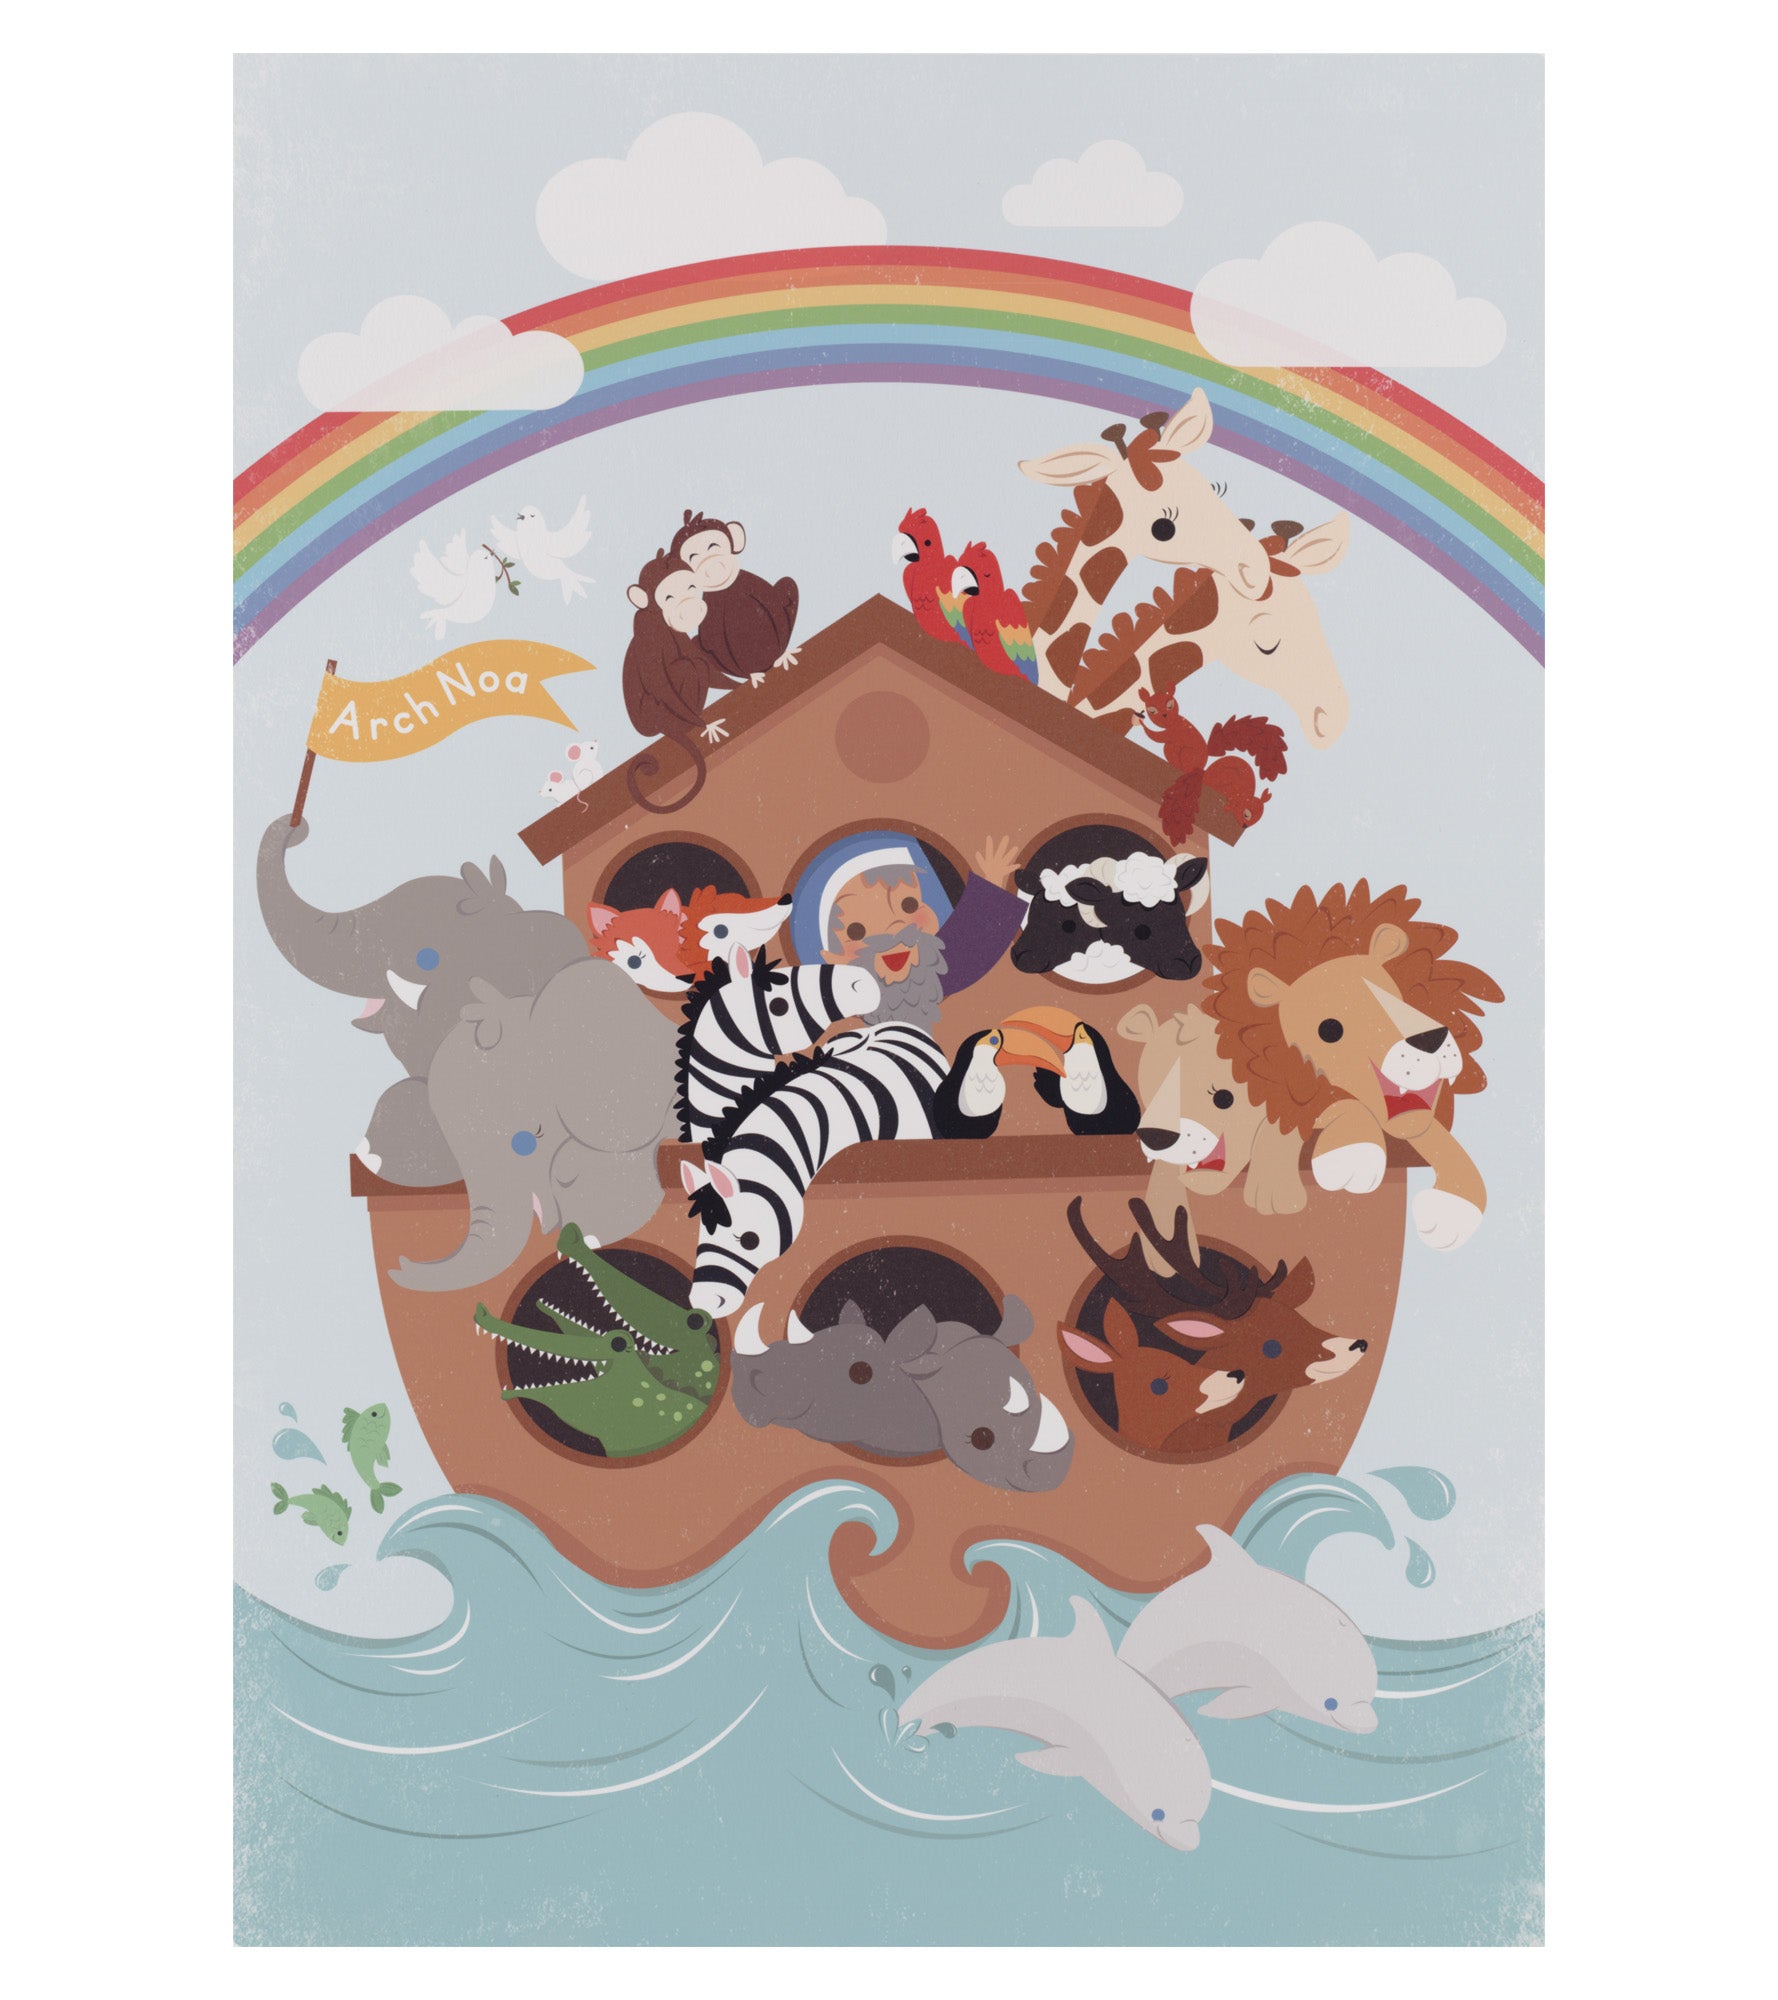 A3 Poster Arch Noa/Noah's Ark – National Library of Wales Online Shop